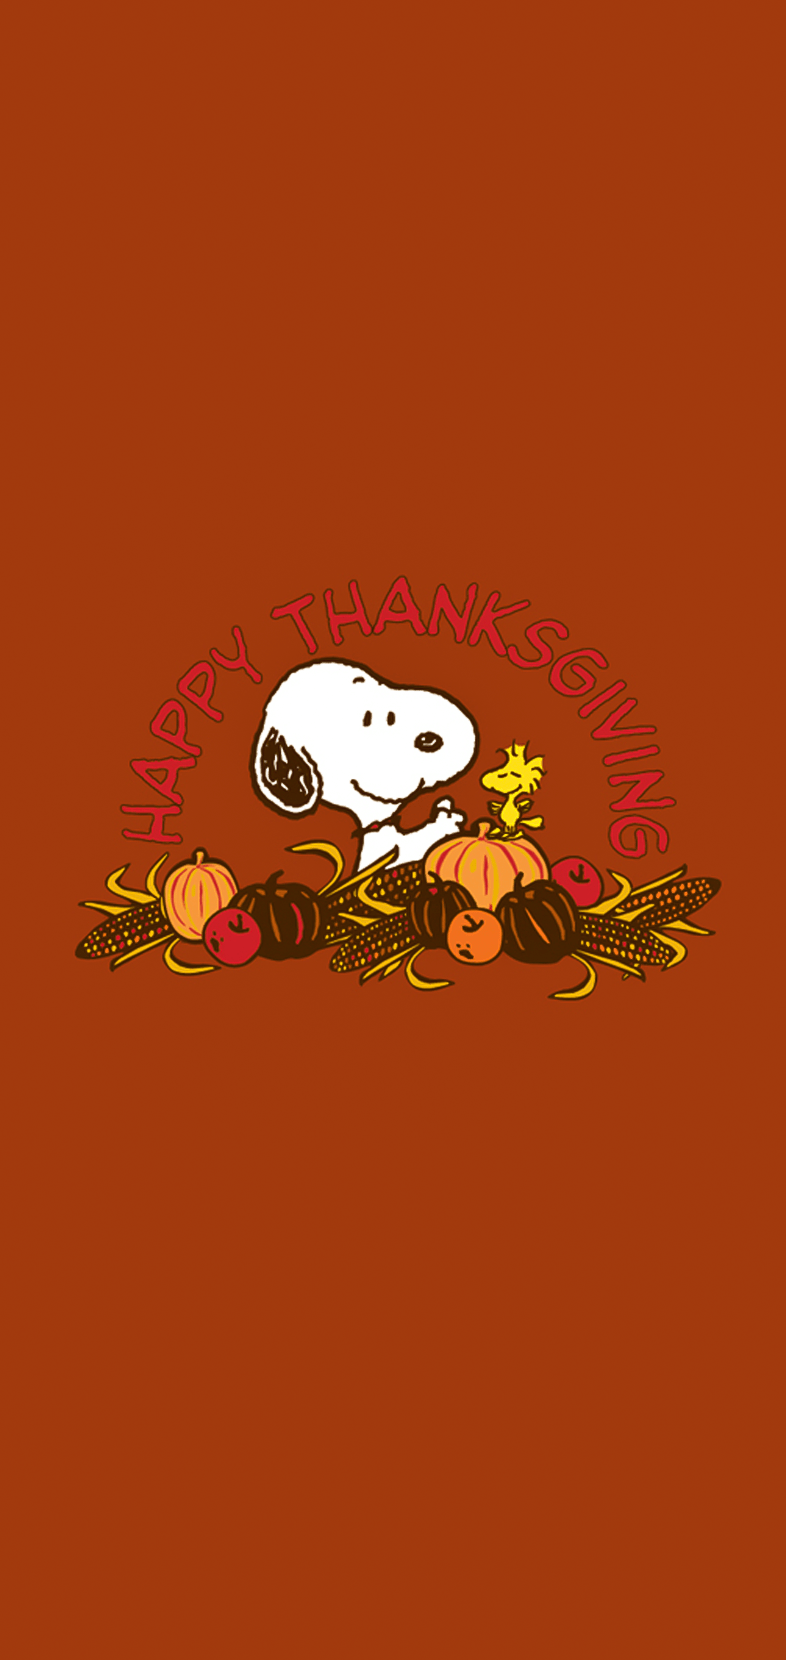 A snoopy and woodstock thanksgiving wallpaper - Thanksgiving